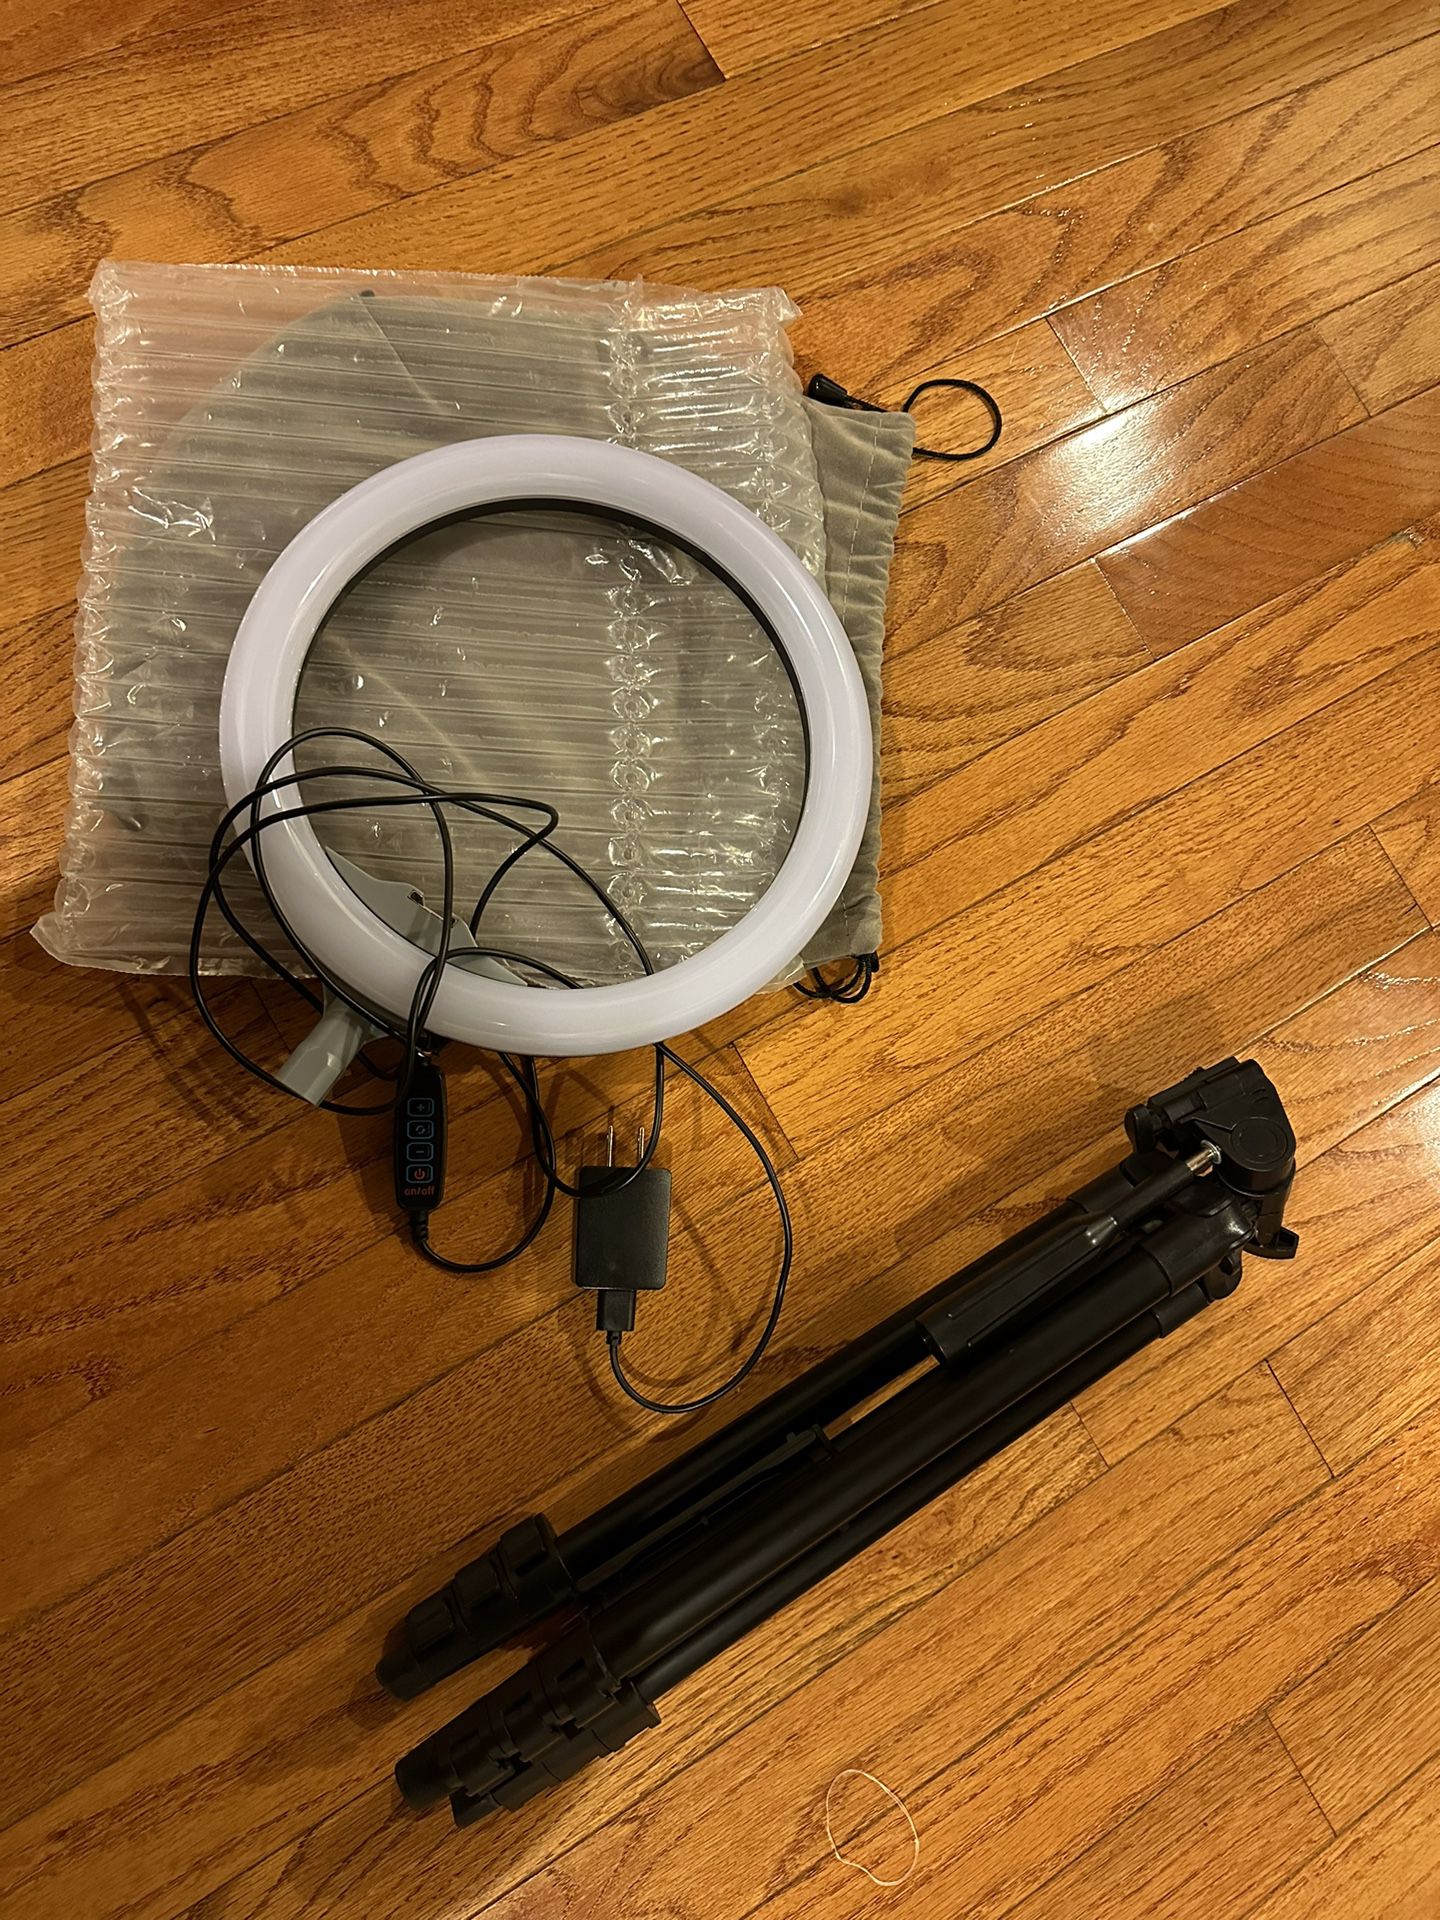 UBeesize 12 inch Ring Light with Stand